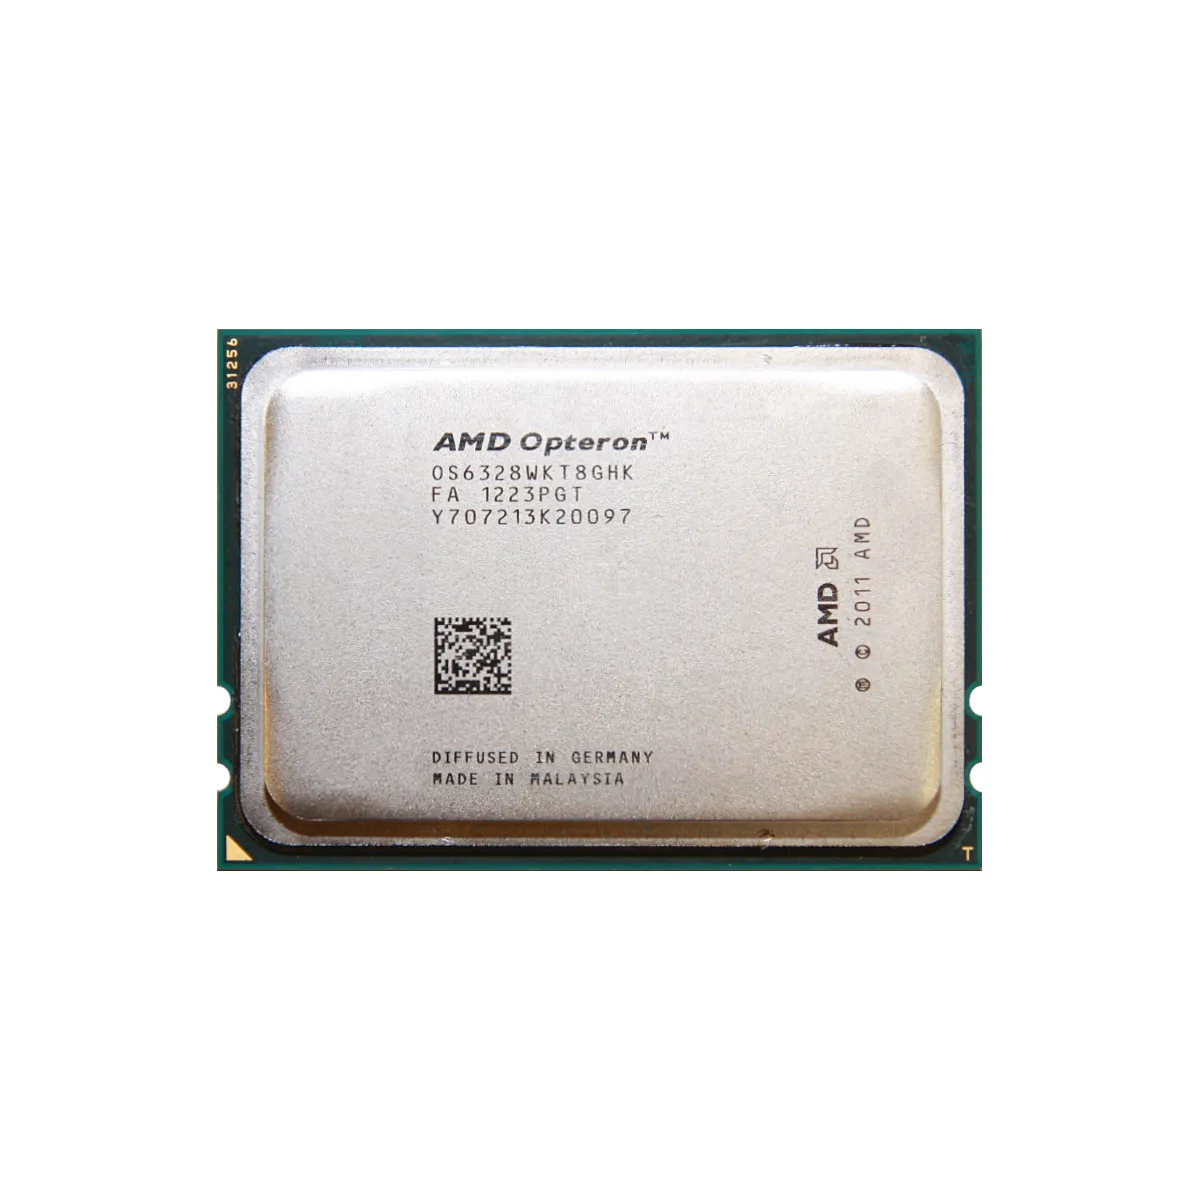 AMD Opteron 6328 3.20Ghz Eight (8) Core CPU